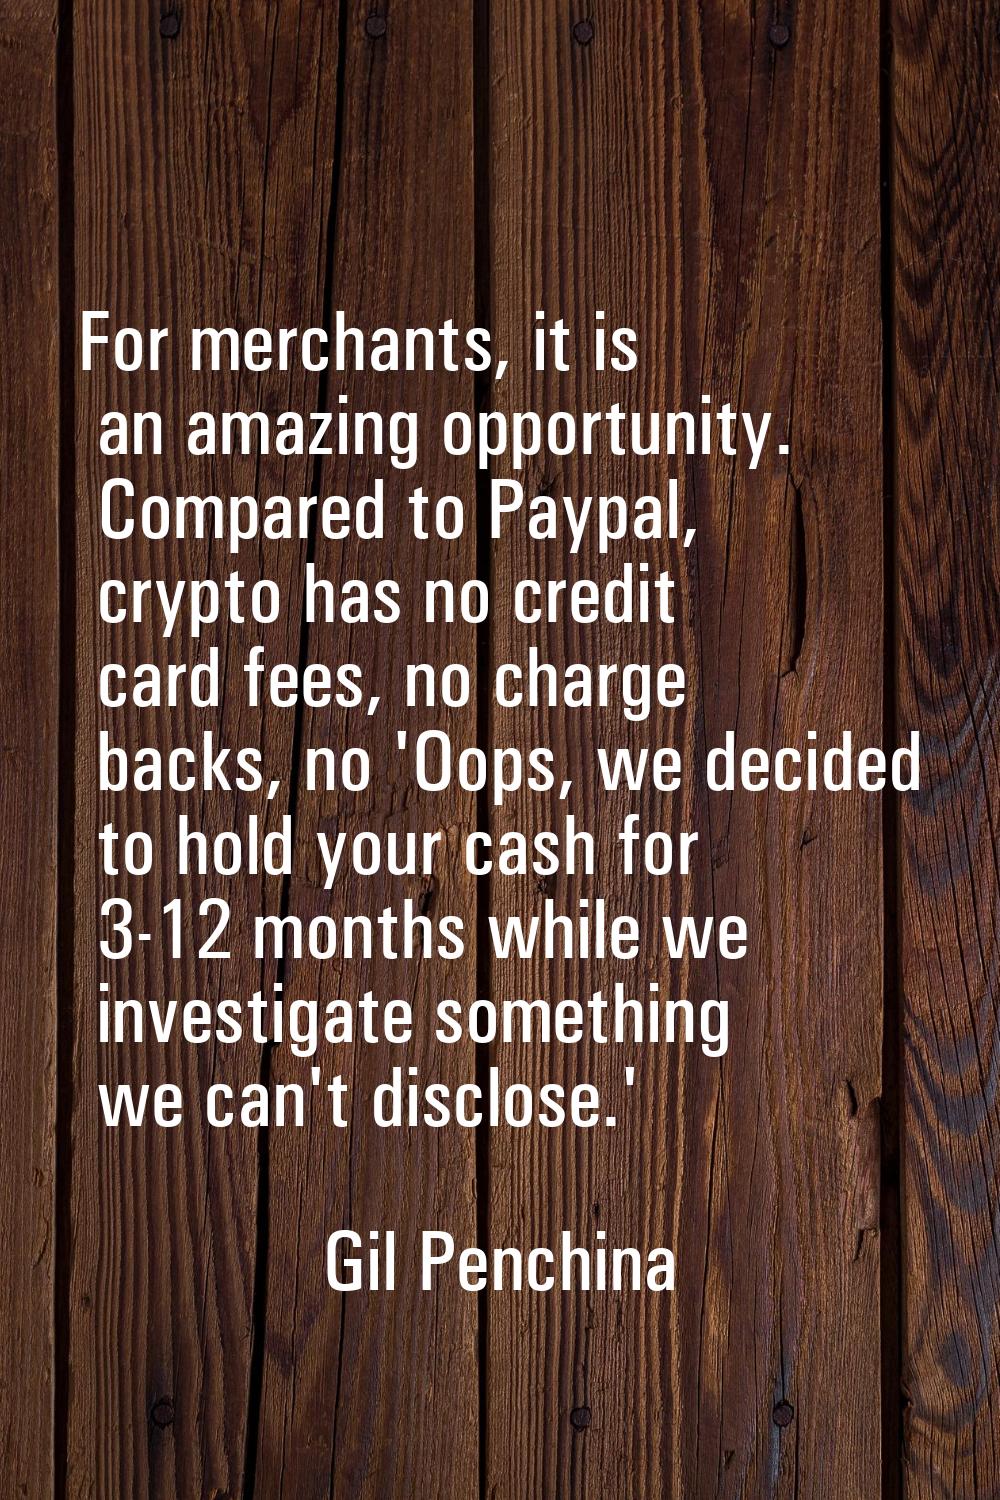 For merchants, it is an amazing opportunity. Compared to Paypal, crypto has no credit card fees, no